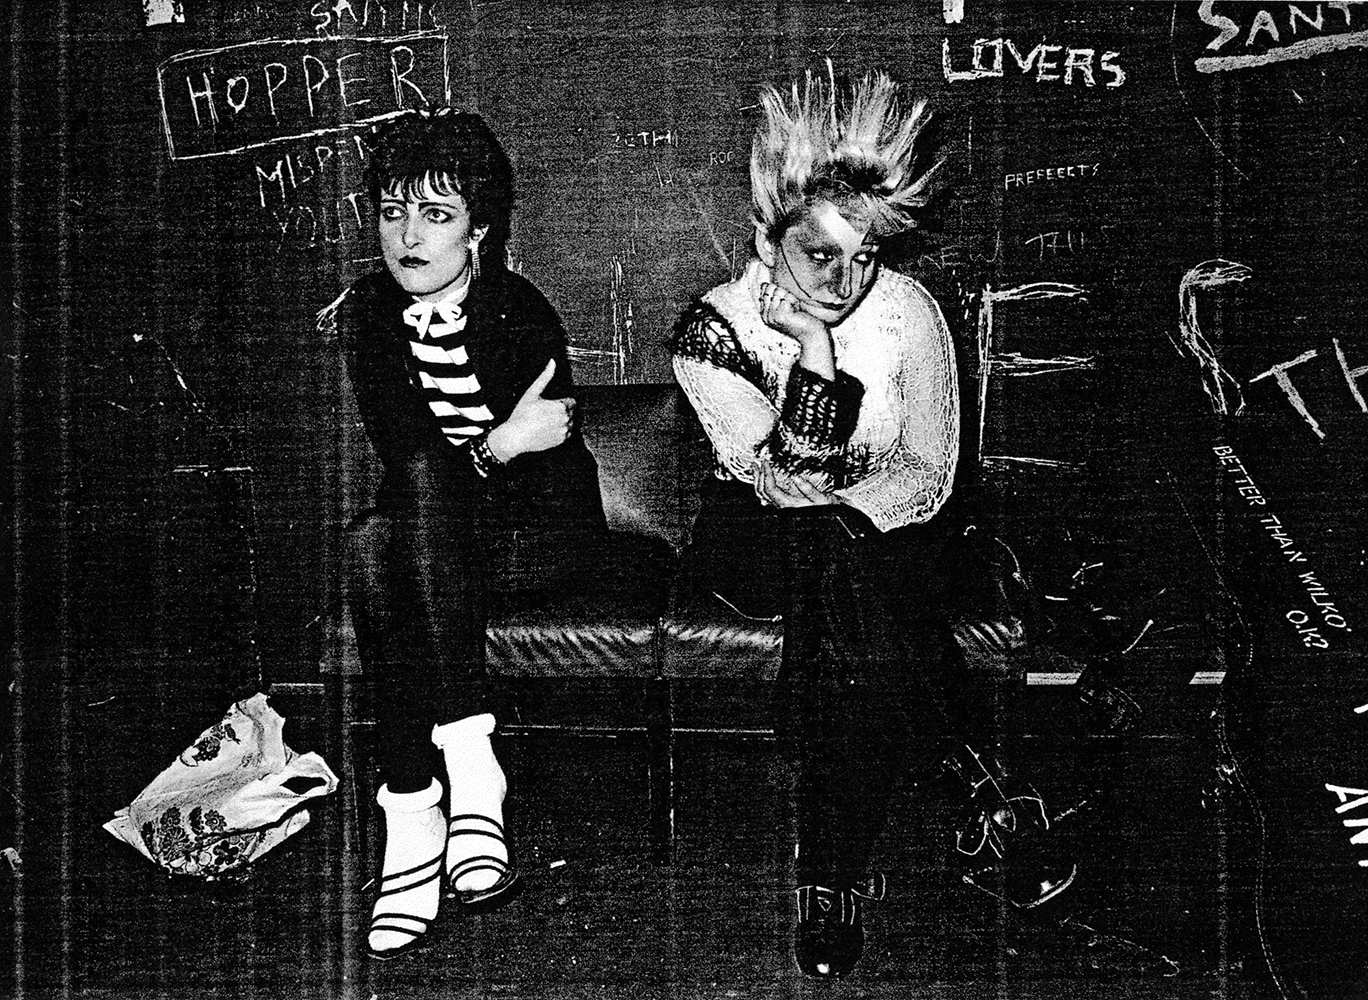 Siouxsie and Jordan at Eric's Club, Liverpool, 1978.